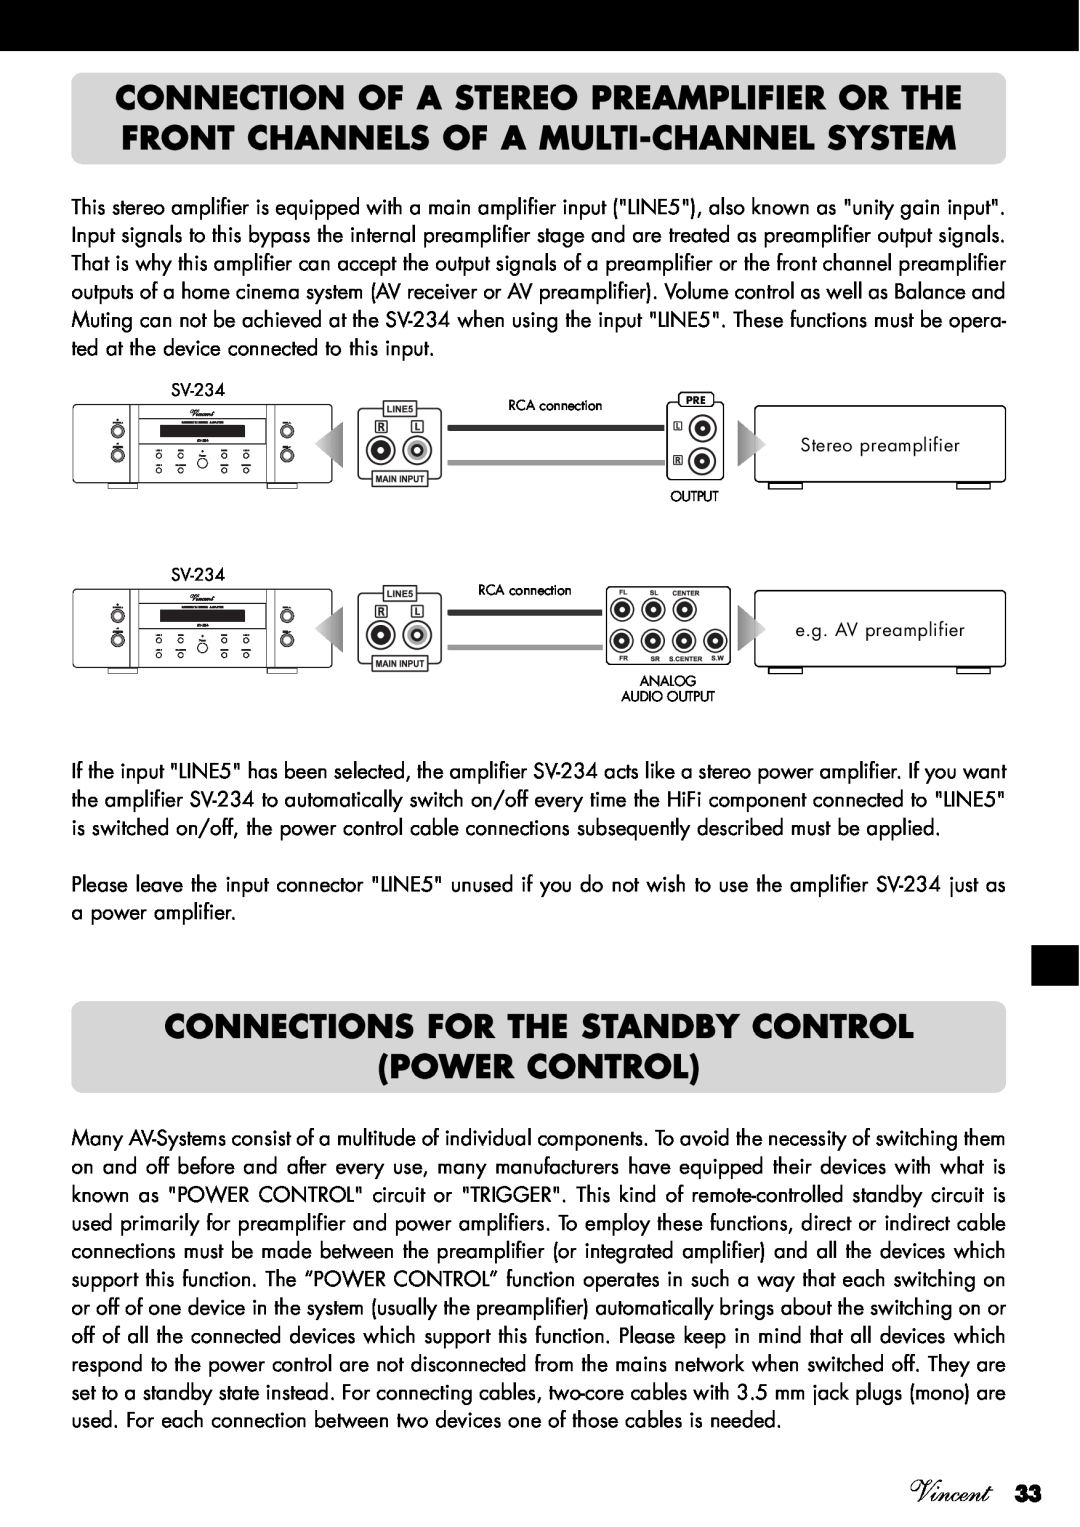 Vincent Audio SV-234 Connections For The Standby Control Power Control, Vincent, Stereo preamplifier, e.g. AV preamplifier 